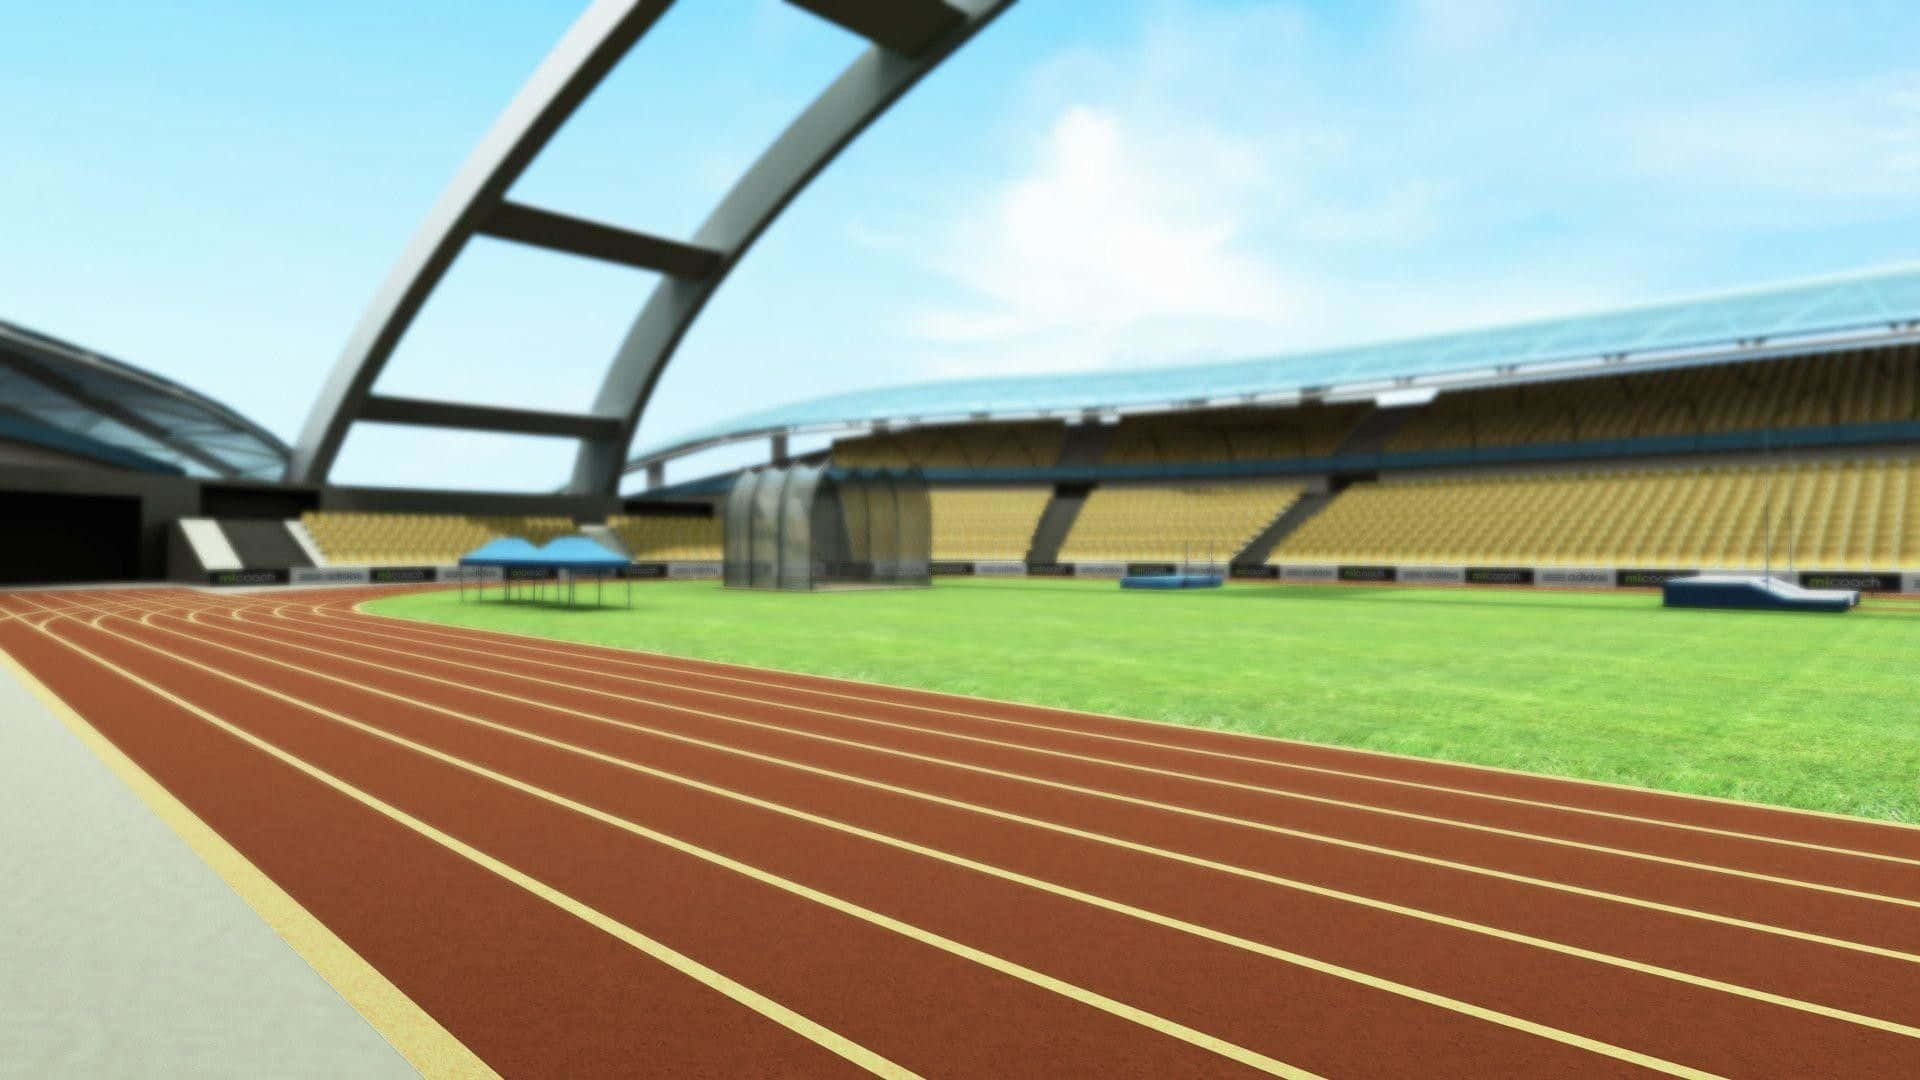 A 3d Rendering Of An Athletic Stadium